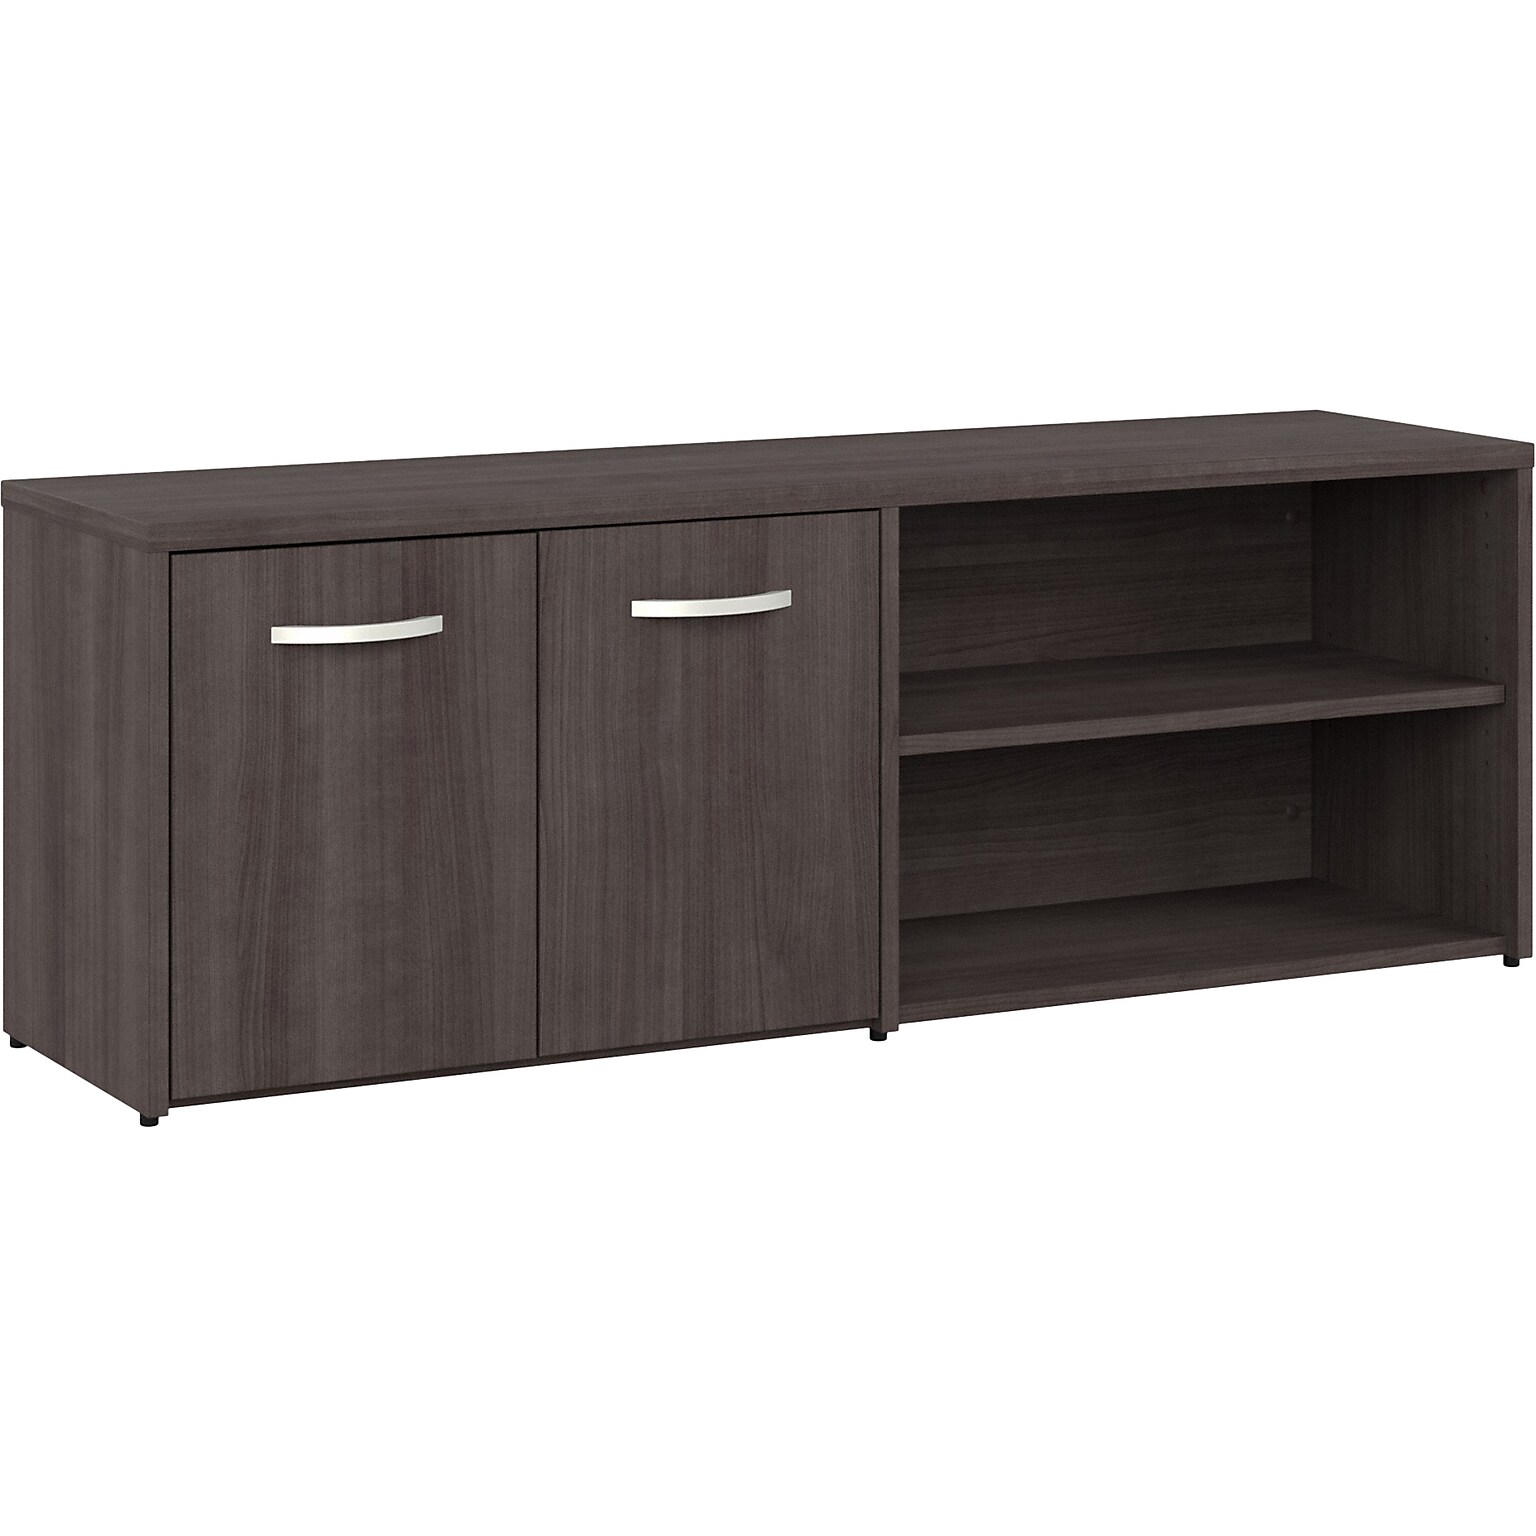 Bush Business Furniture Hybrid 21 Low Storage Cabinet with Doors and 6 Shelves, Storm Gray (HYS160SG-Z)